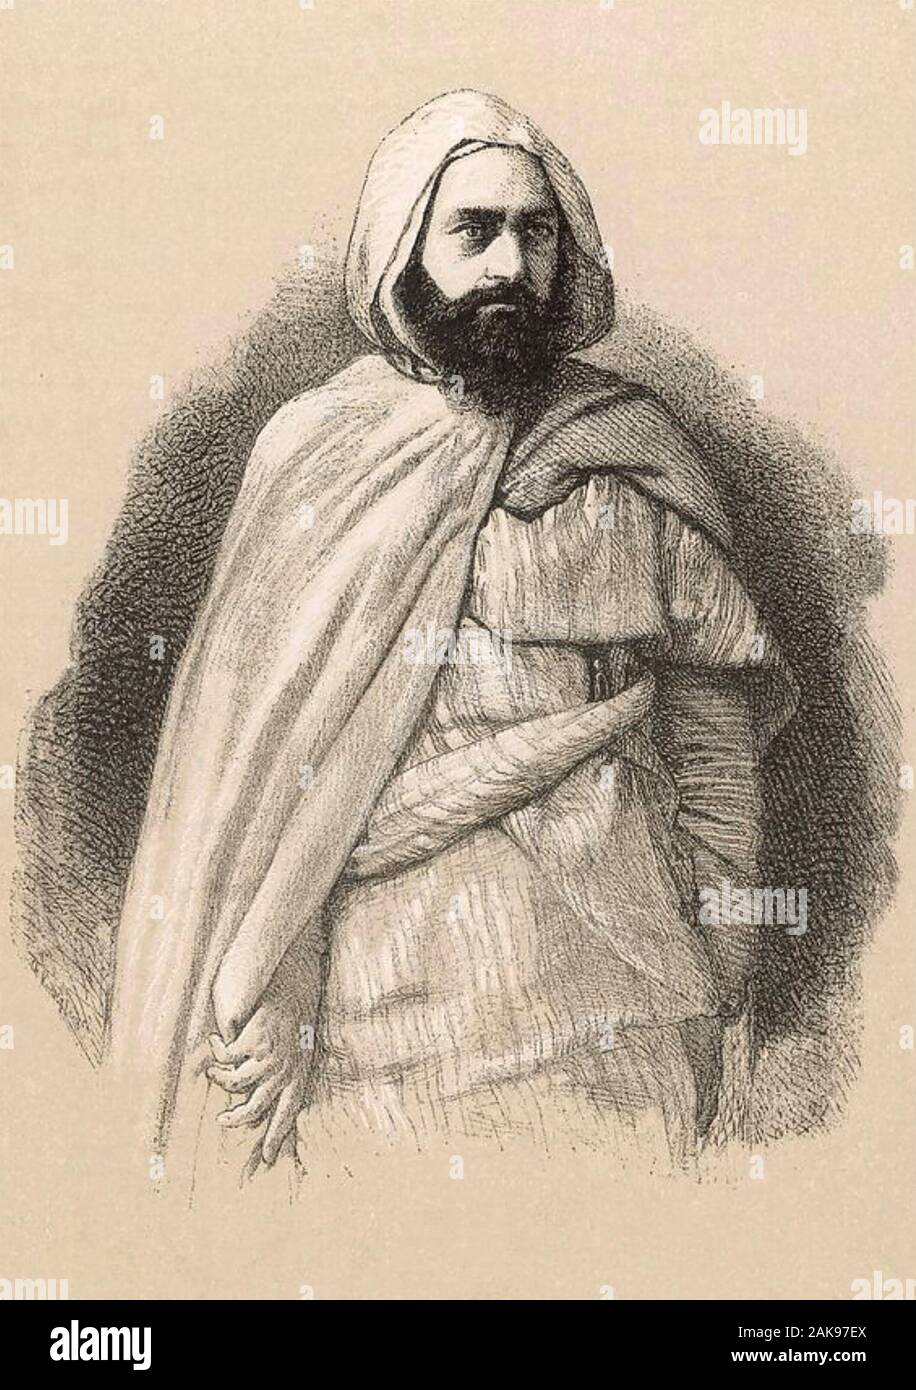 EMIR ABDELKADER(1808-1883) Algerian religious and military leader against French occupation; about 1860 Stock Photo